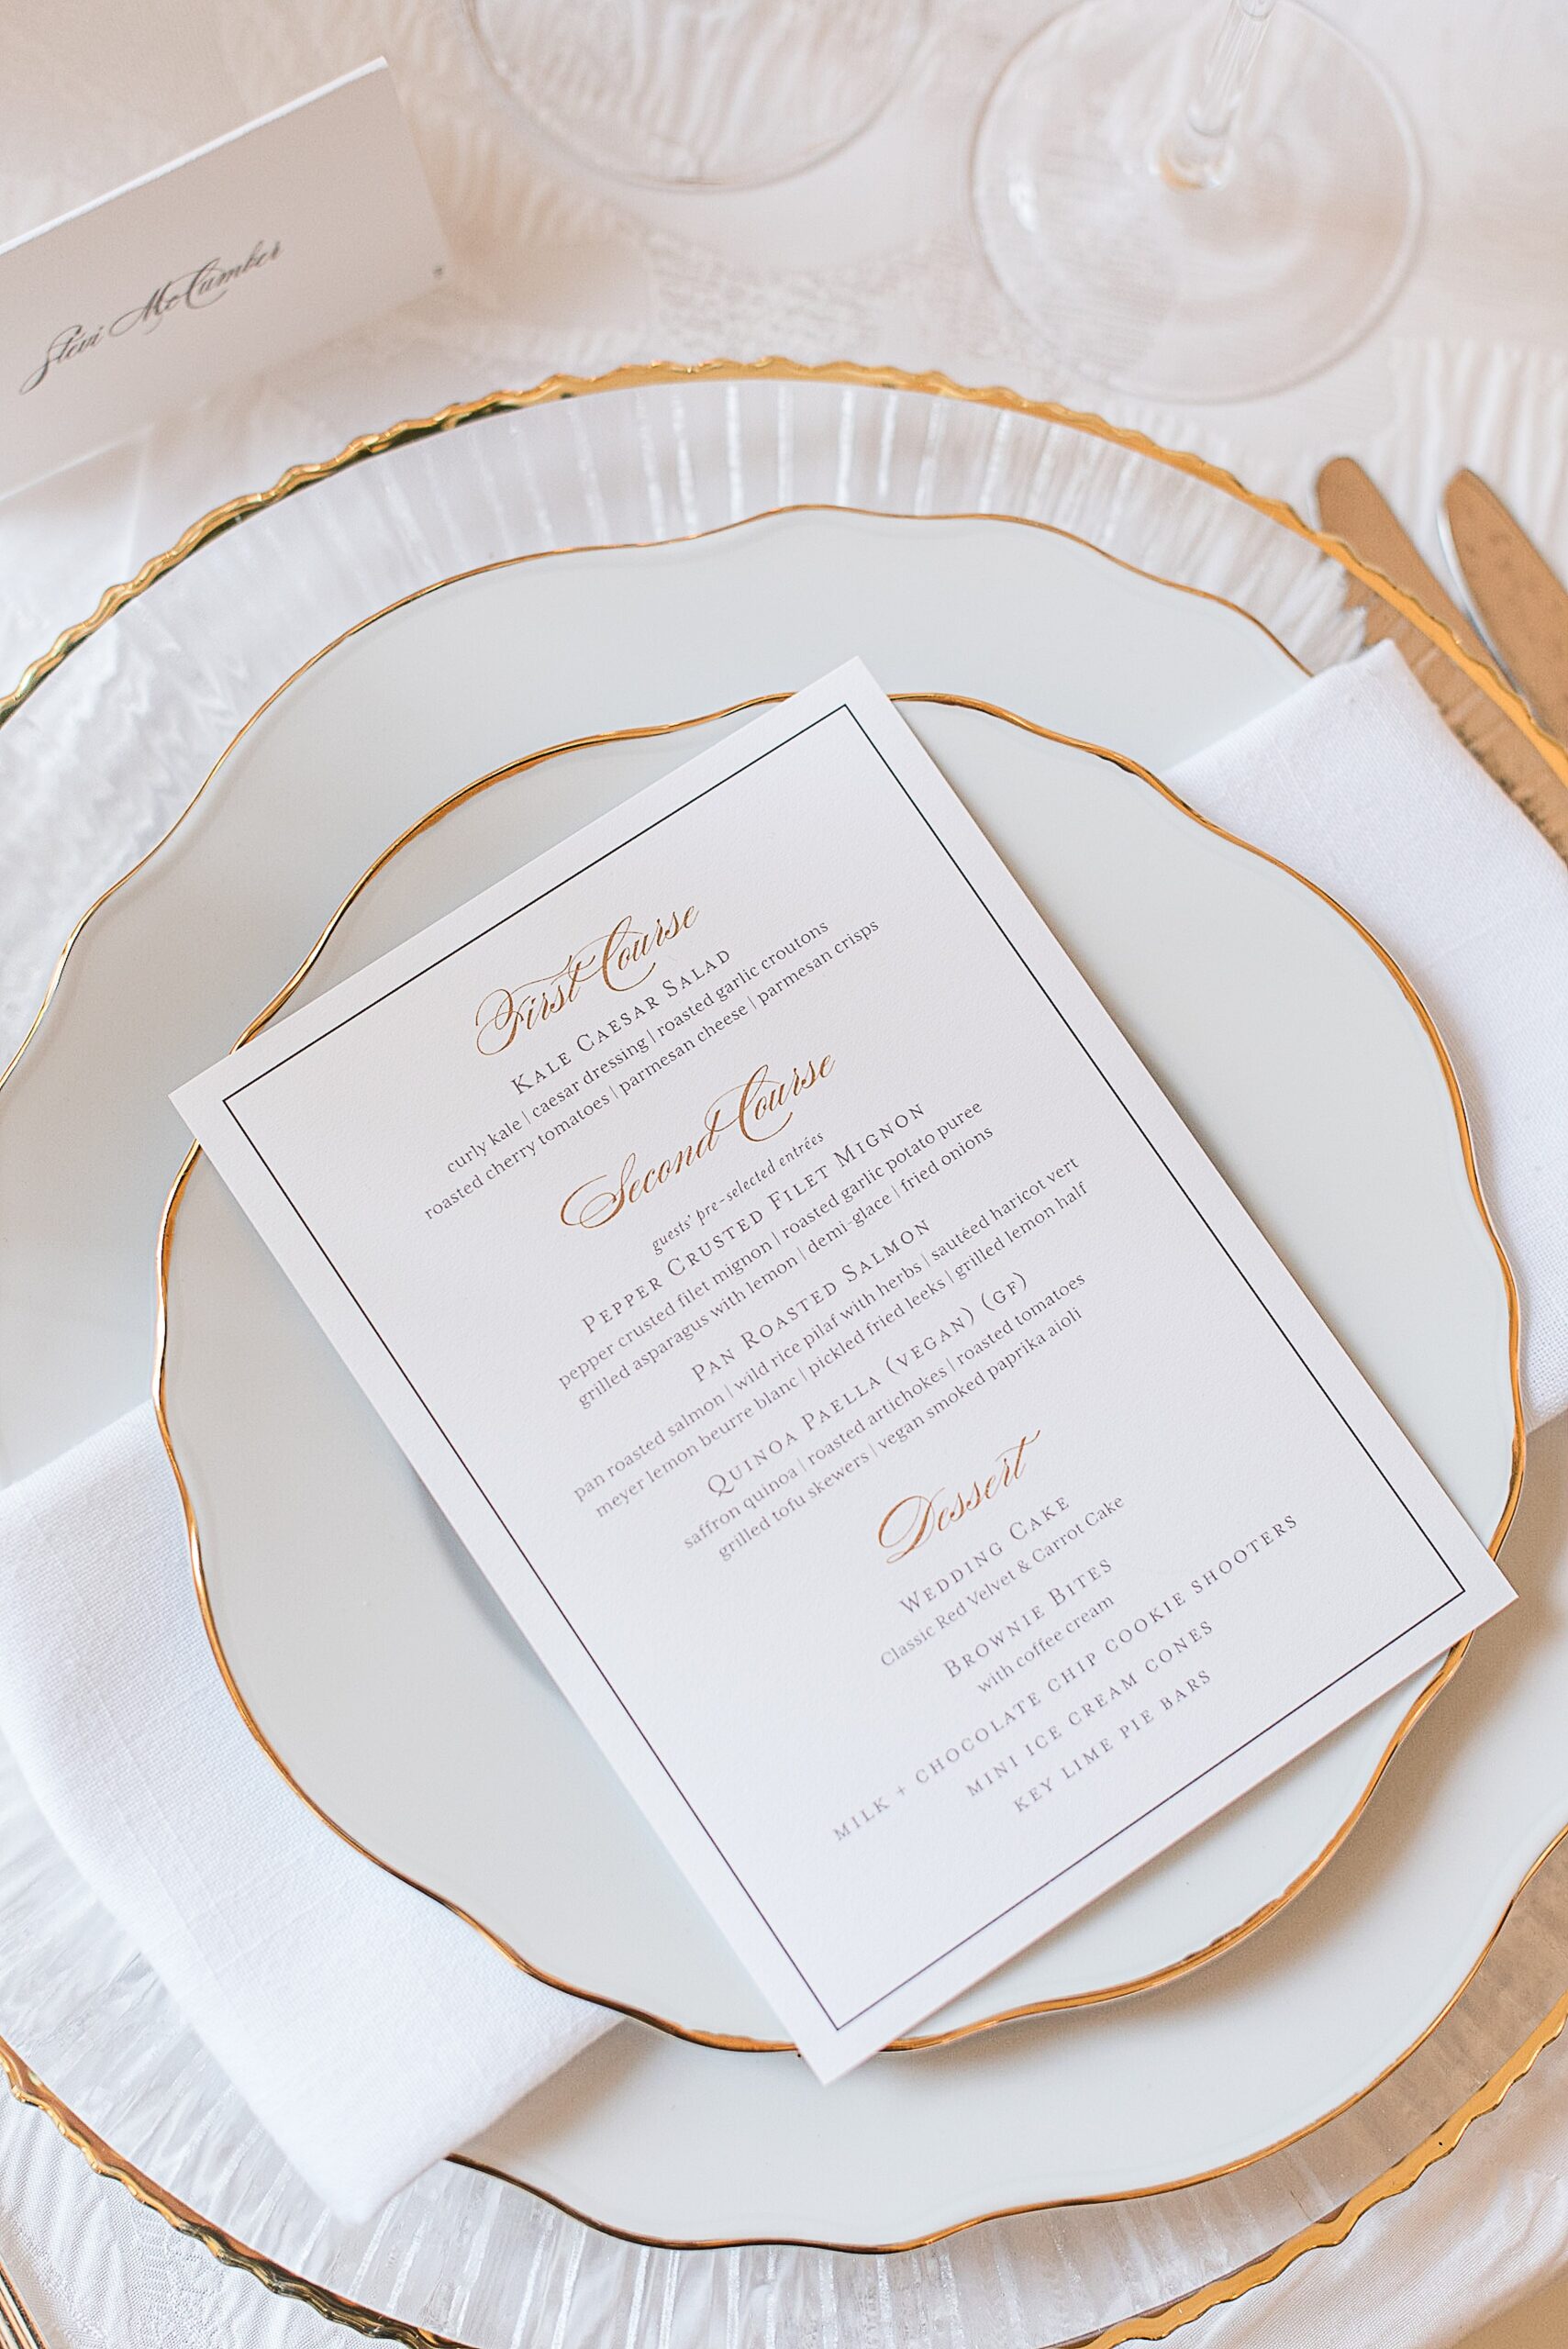 Details of a wedding reception menu on a plate with gold linings at one of the Baltimore Mansion Wedding Venues